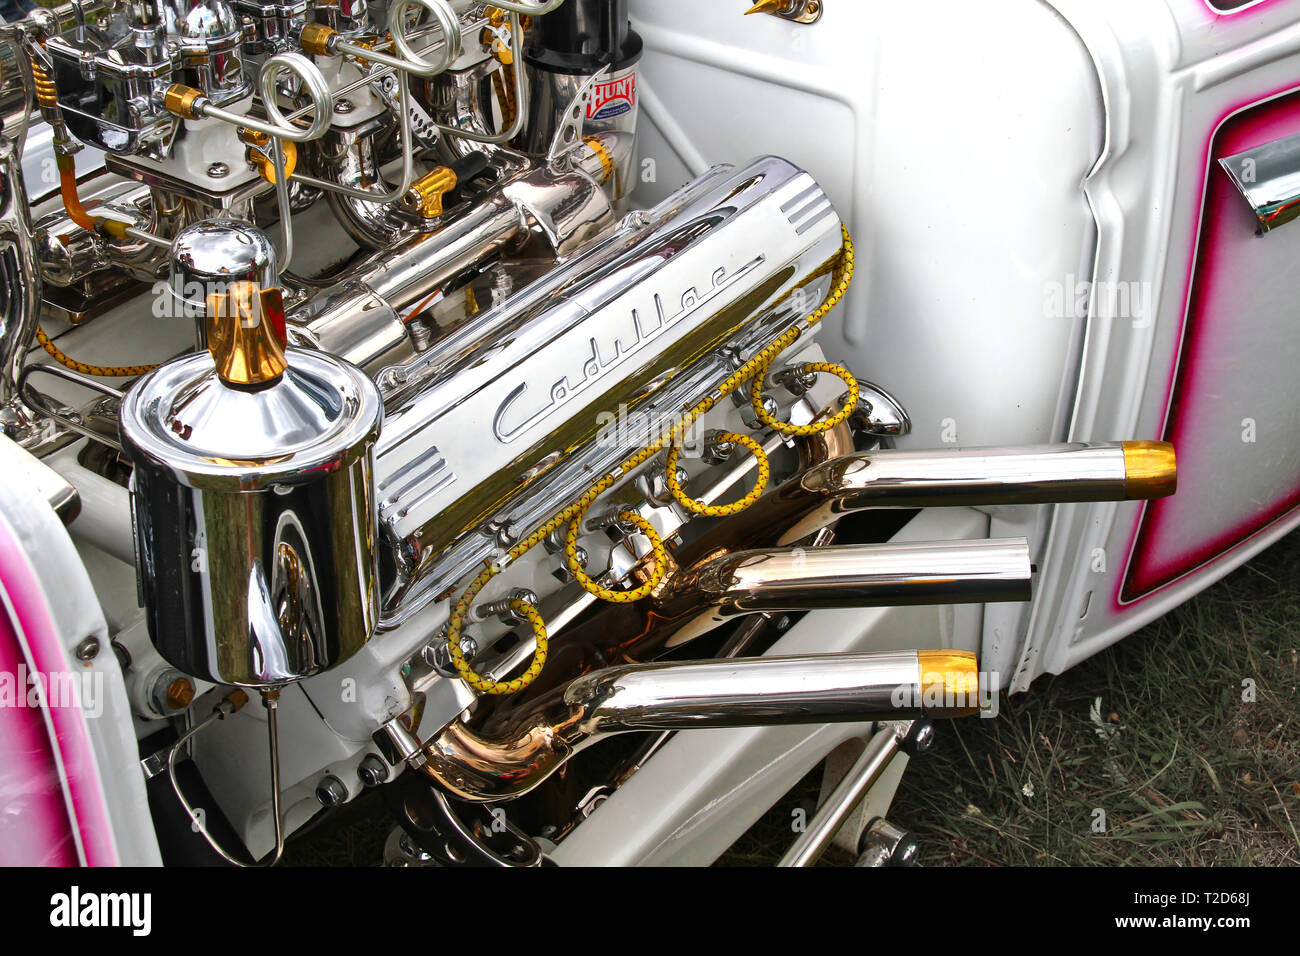 Fully Chromed V8 Cadillac Engine At Pick Nick 18 Classic Car Show In Forssa Finland 05 08 18 Forssa Finland Stock Photo Alamy